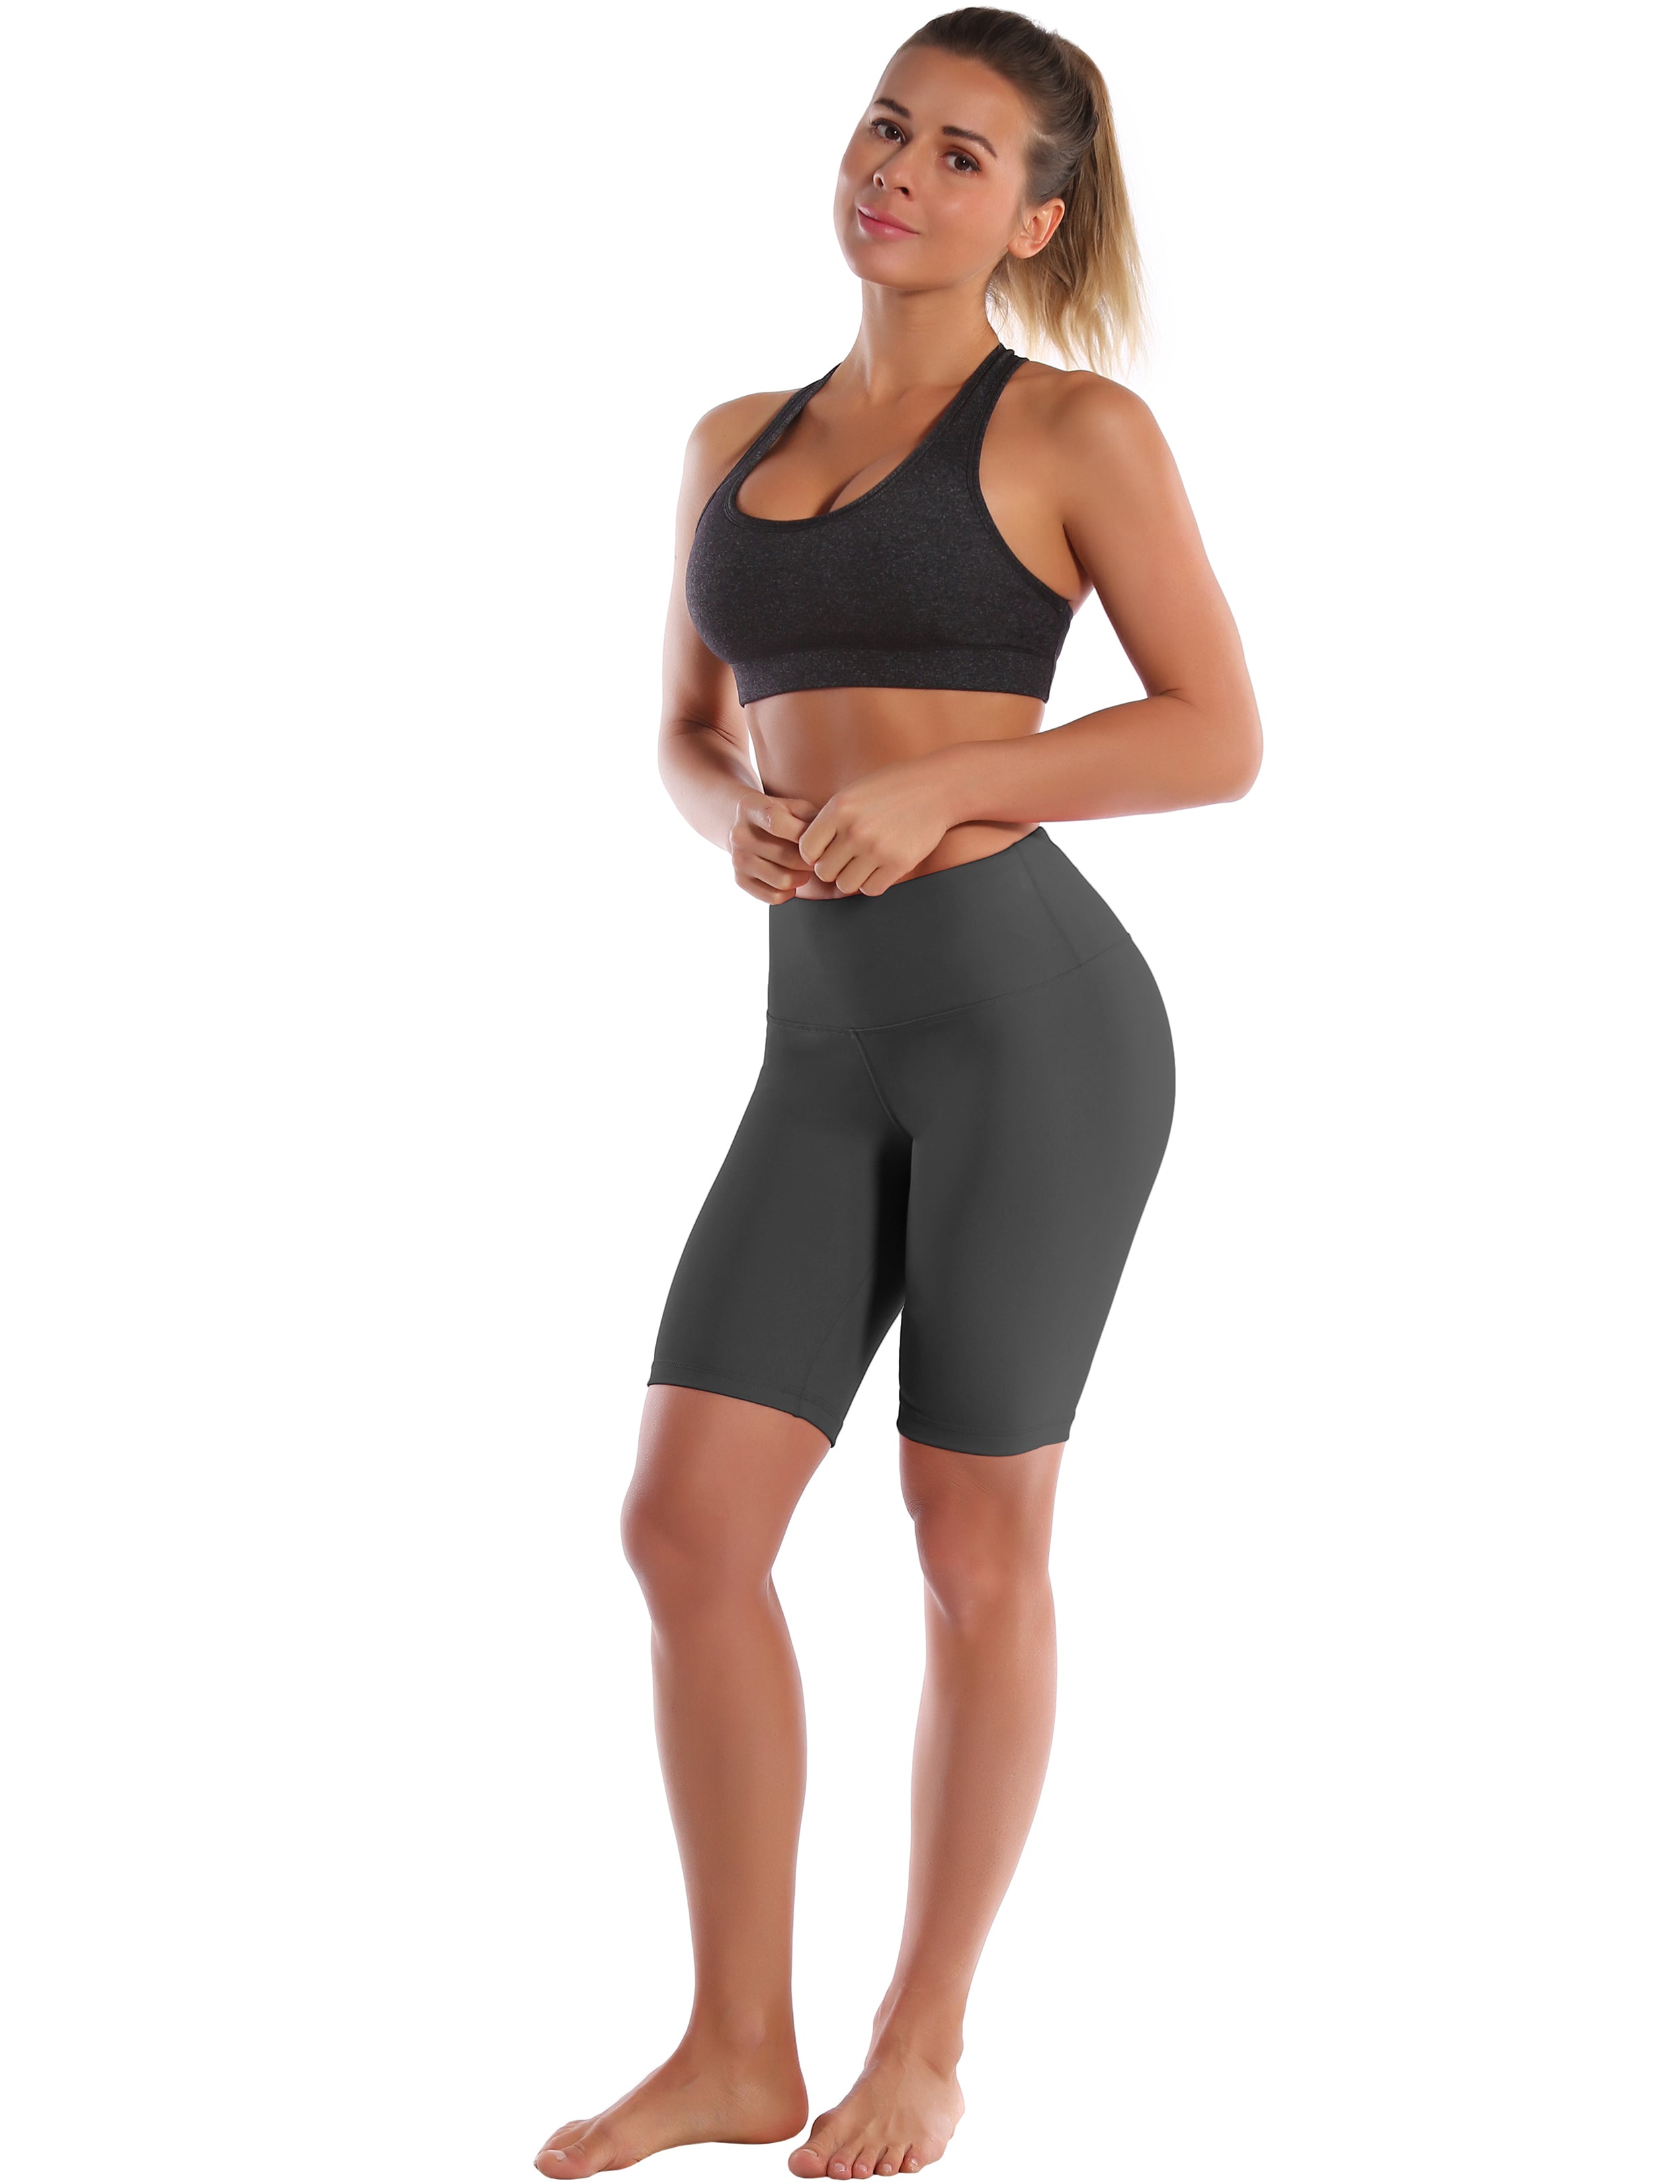 8" High Waist yogastudio Shorts shadowcharcoal Sleek, soft, smooth and totally comfortable: our newest style is here. Softest-ever fabric High elasticity High density 4-way stretch Fabric doesn't attract lint easily No see-through Moisture-wicking Machine wash 75% Nylon, 25% Spandex